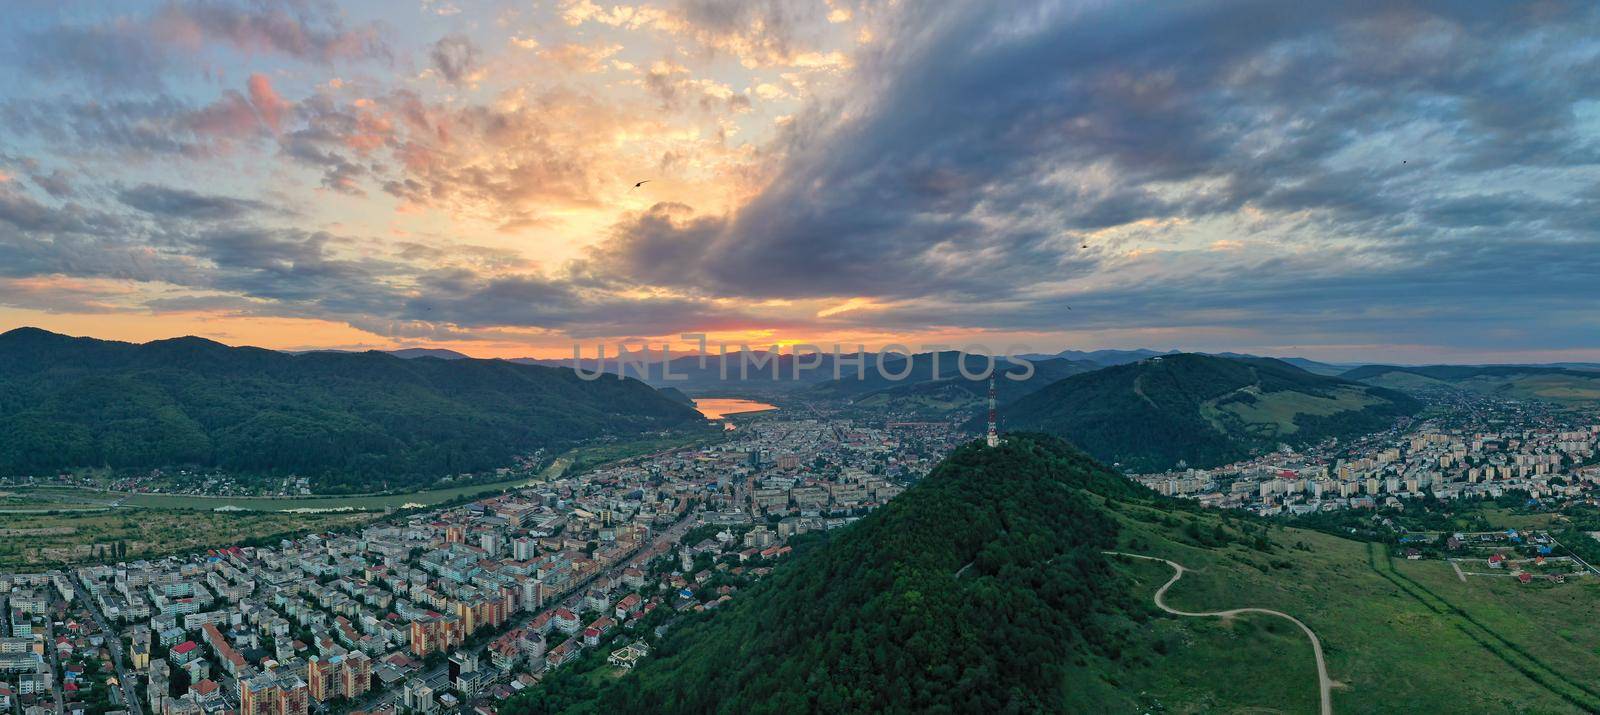 Sunset panorama over green mountain city in Romanian Carpathians, aerial summer landscape of Piatra Neamt city surrounded by forest.